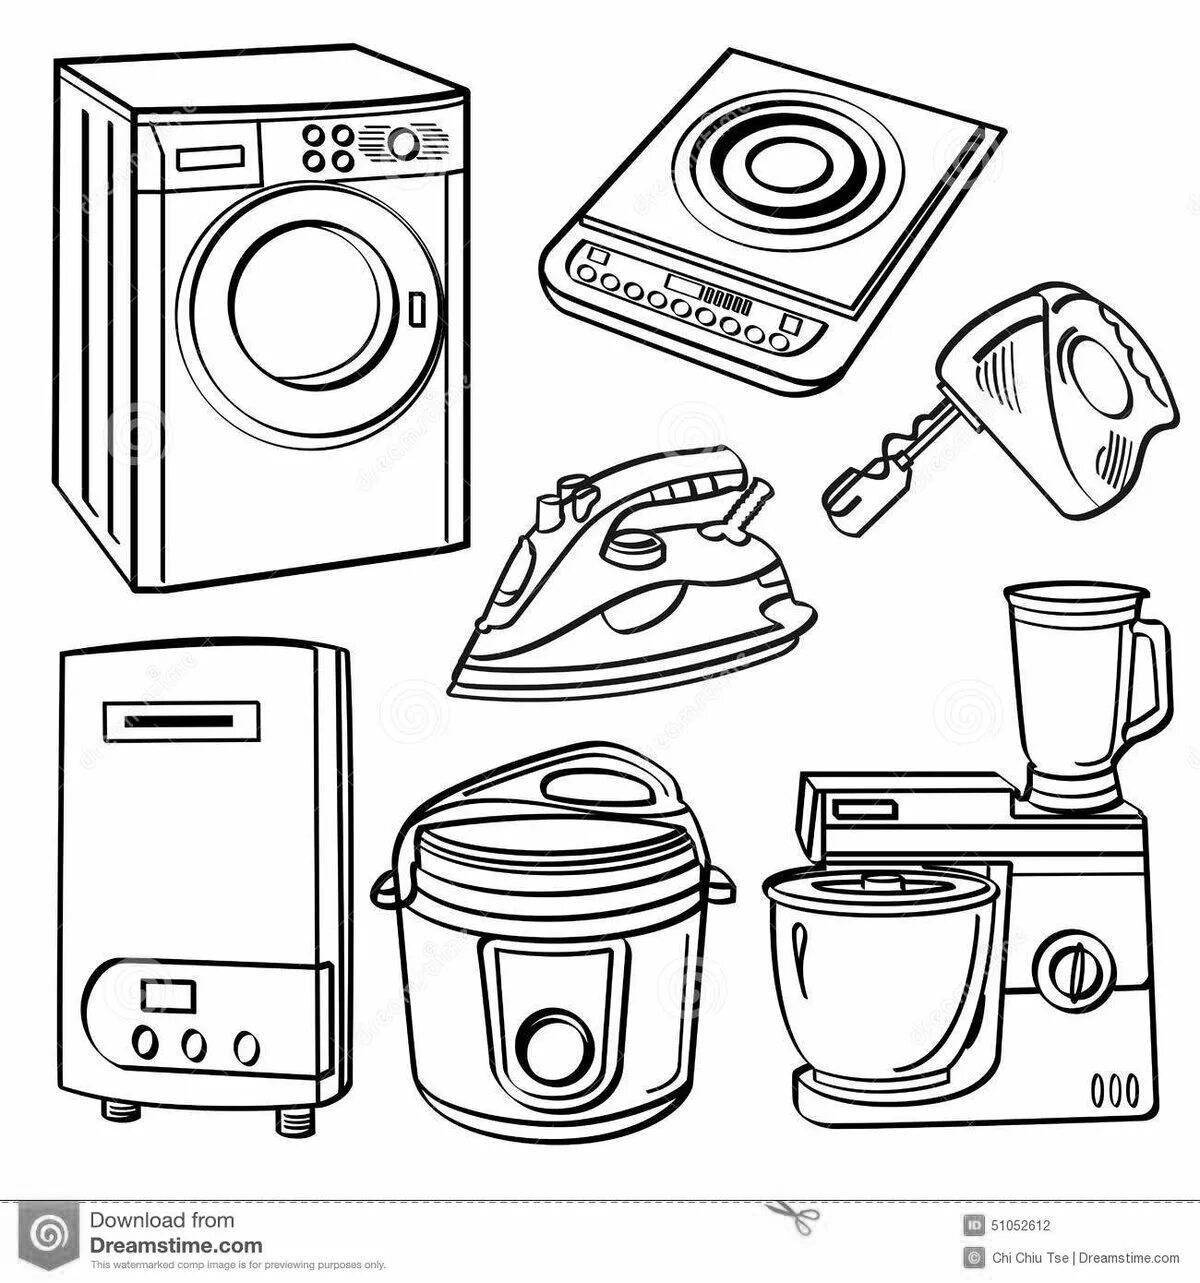 Playful household appliances coloring book for toddlers 2-3